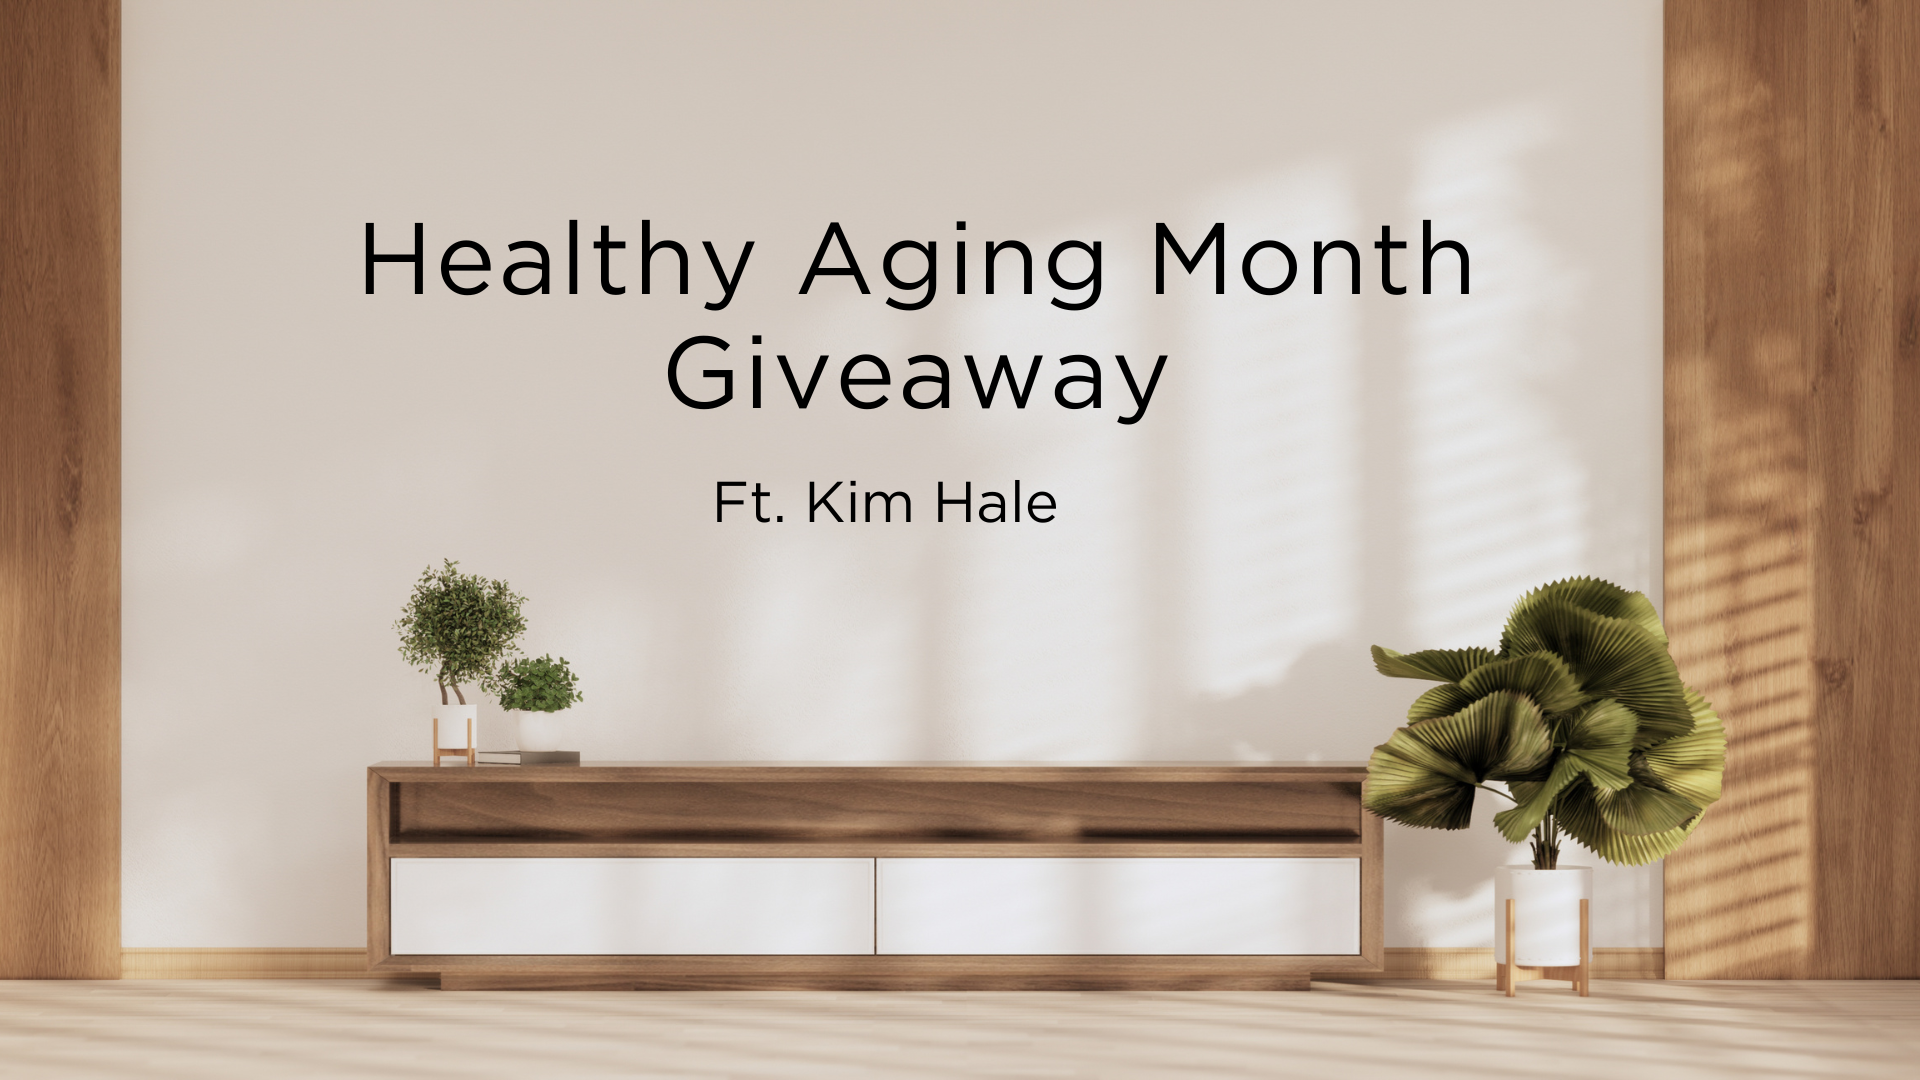 Healthy Aging Month Giveaway - Ft. Kim Hale